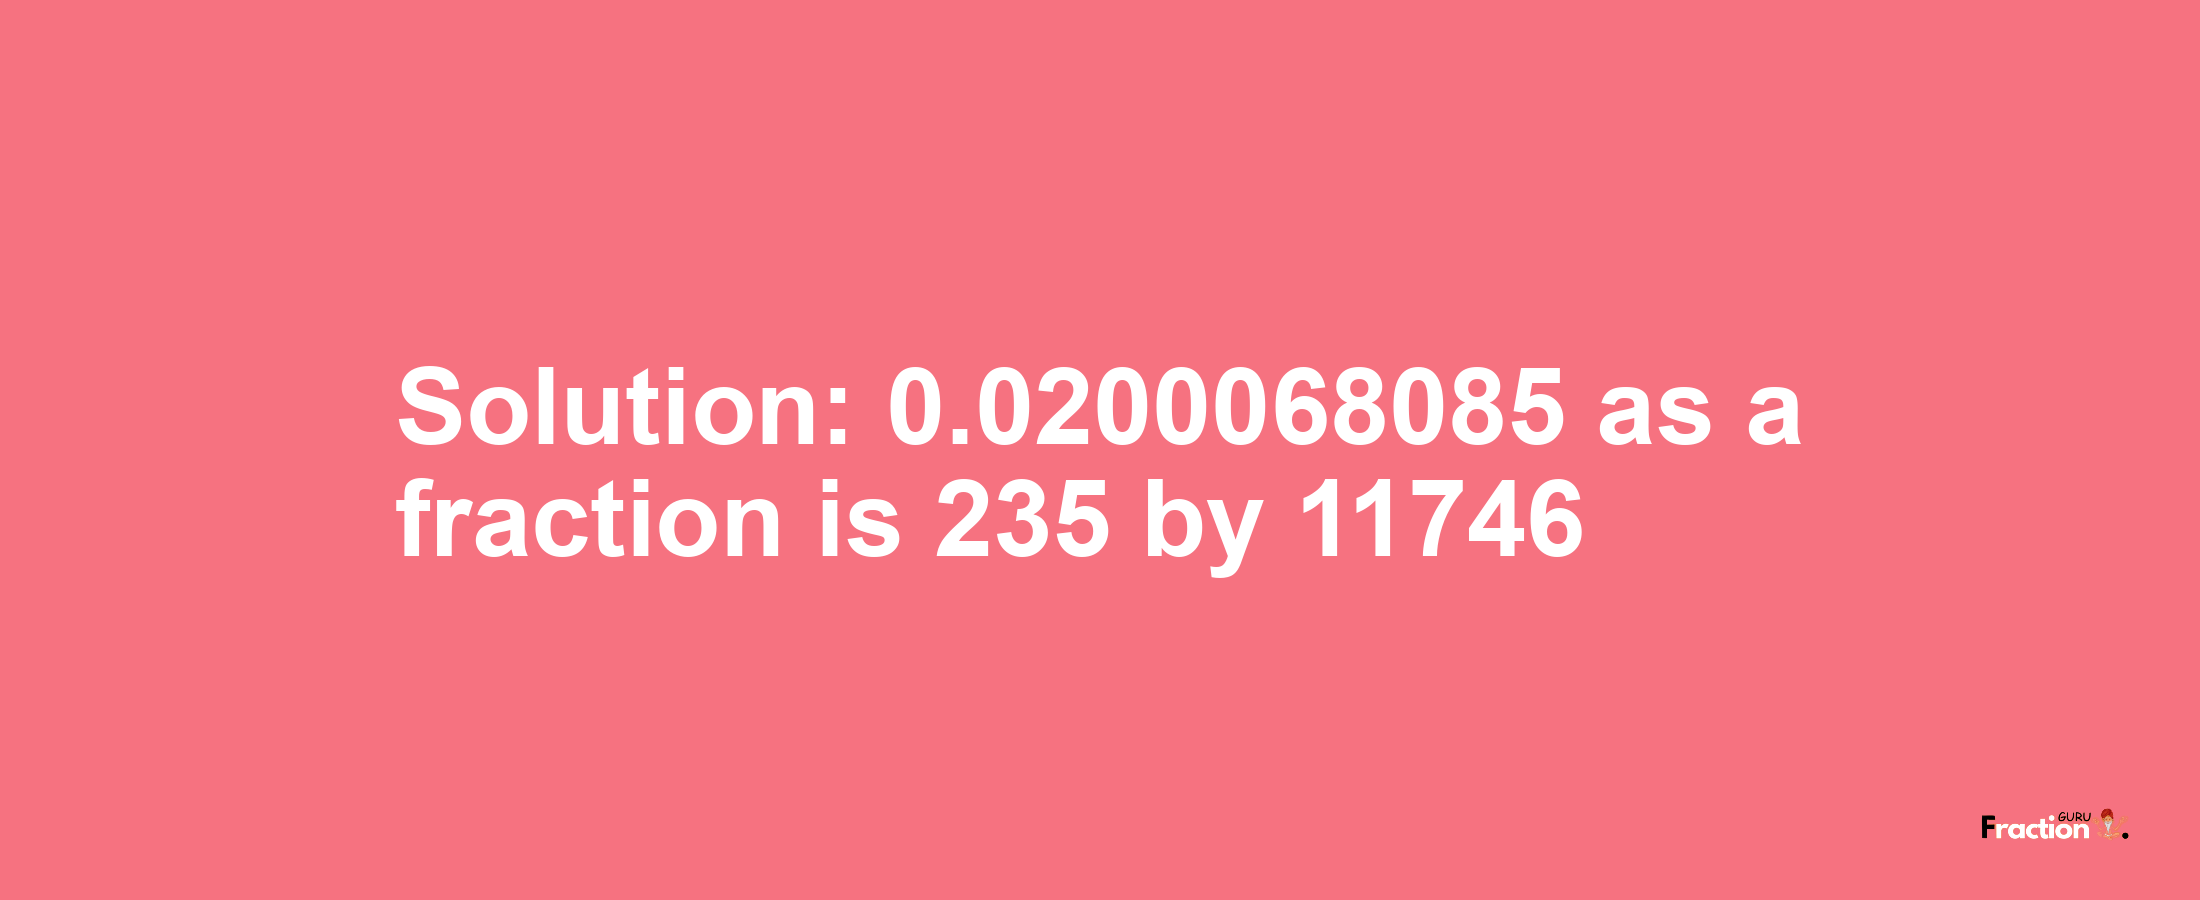 Solution:0.0200068085 as a fraction is 235/11746